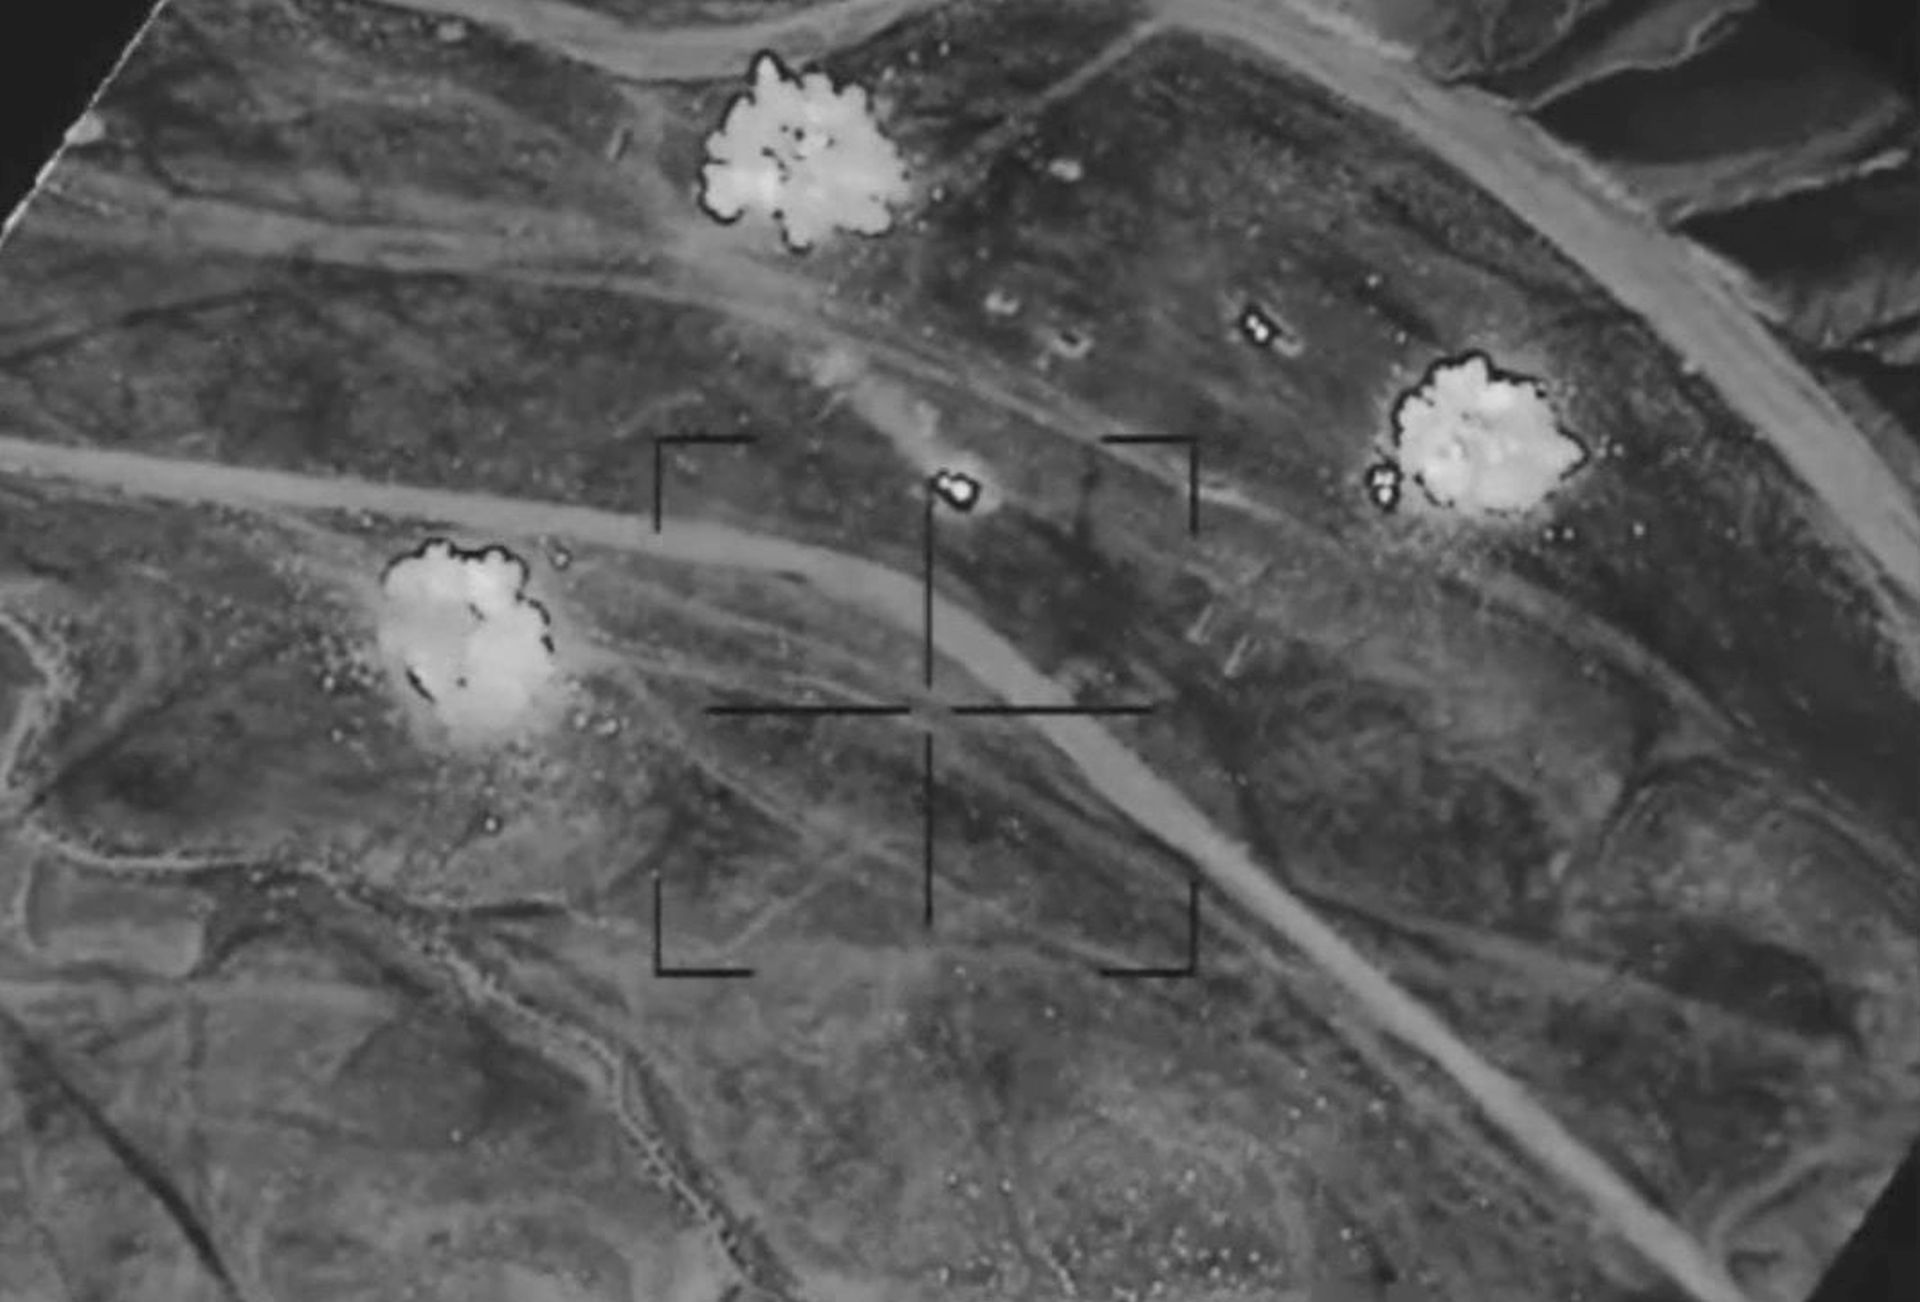 epa05668502 A frame grab obtained from a handout video by the US Department of Defense on 10 December 2016 shows oil tankers allegedly belonging to the militant group calling itself Islamic State (IS) being hit by airstrikes at an undisclosed location in central Syria, 08 December 2016. According to the US military, coalition airstrikes by the 'Operation Inherent Resolve' targeted 168 oil trucks.  EPA/US DEPARTMENT OF DEFENSE/HANDOUT  HANDOUT EDITORIAL USE ONLY/NO SALES